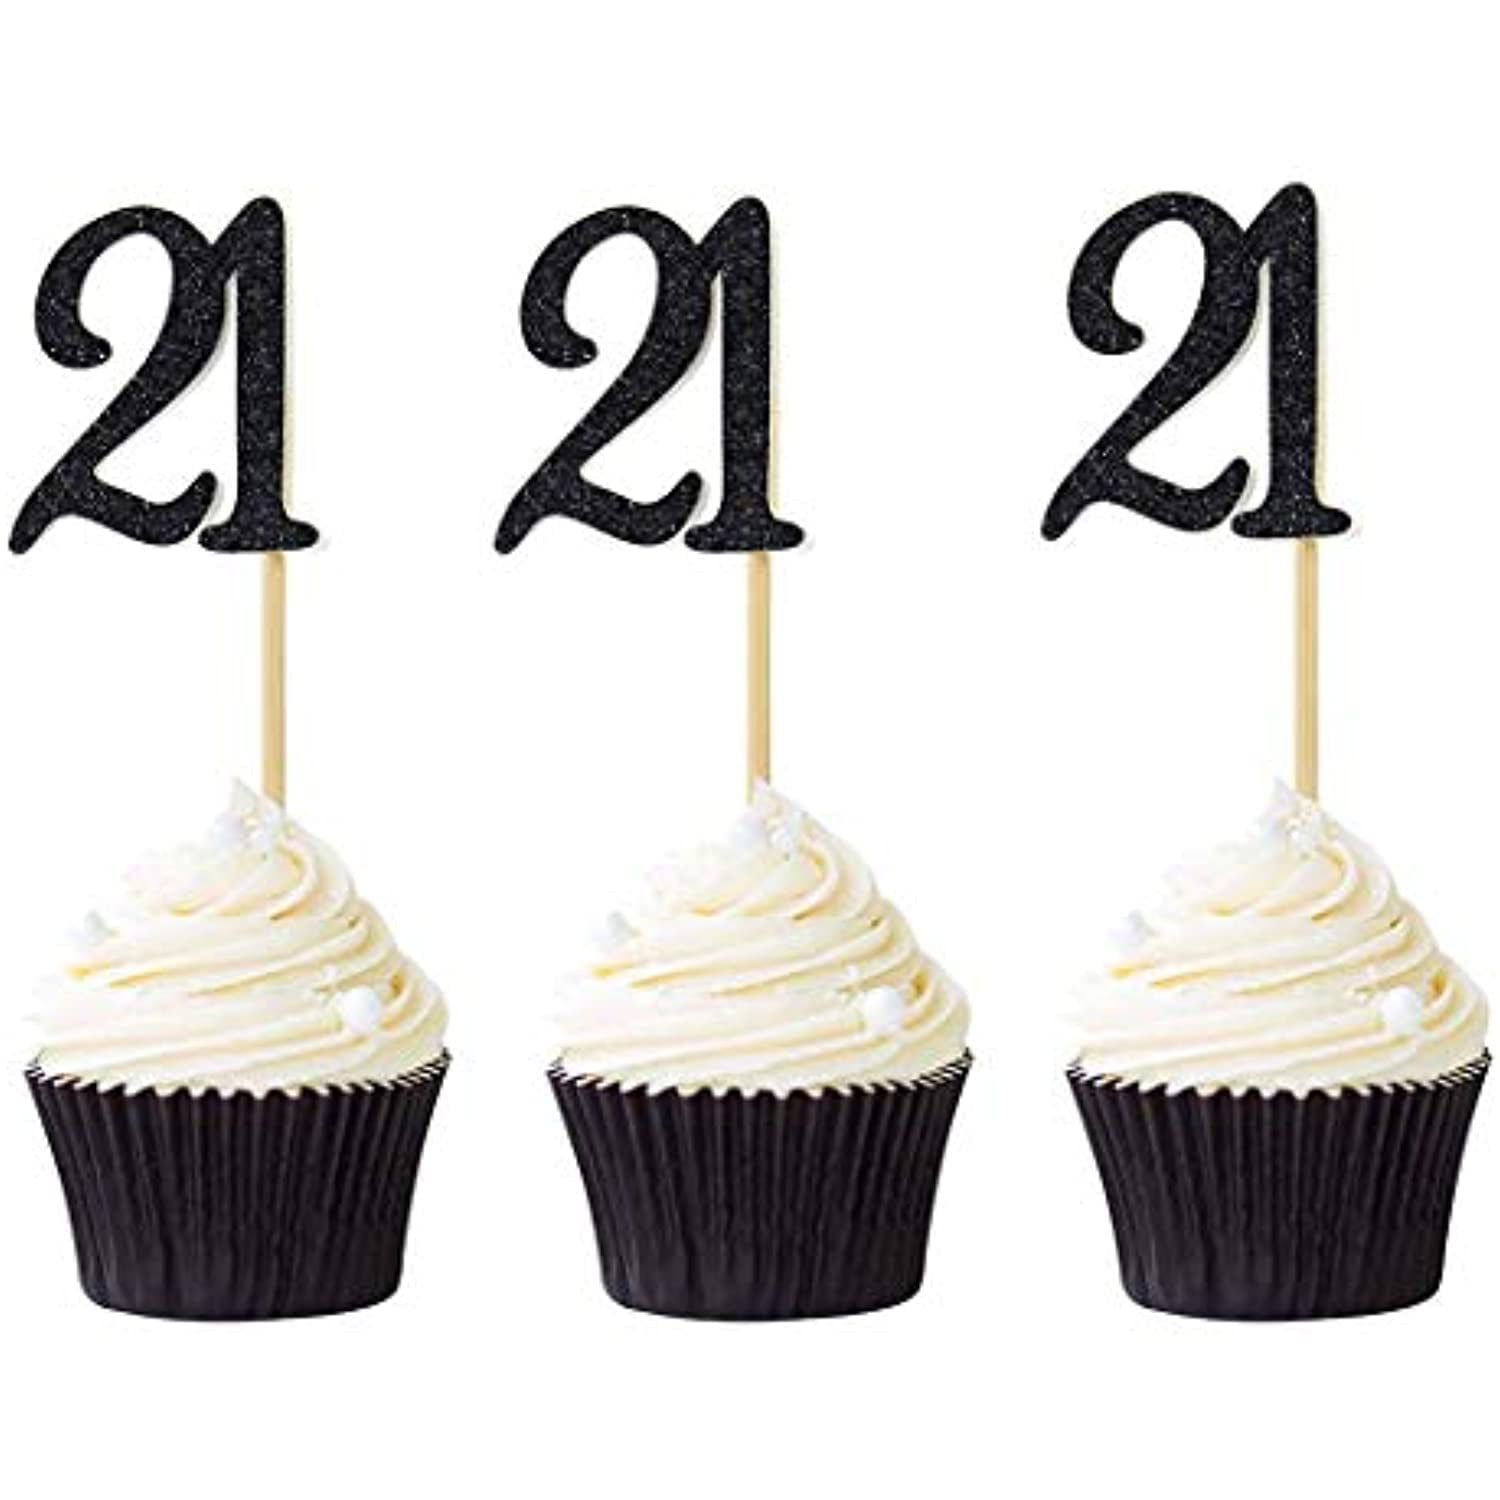 NEW Wilton Silver 25th Anniversary Party Pick Cake Cupcake Topper Decorating 